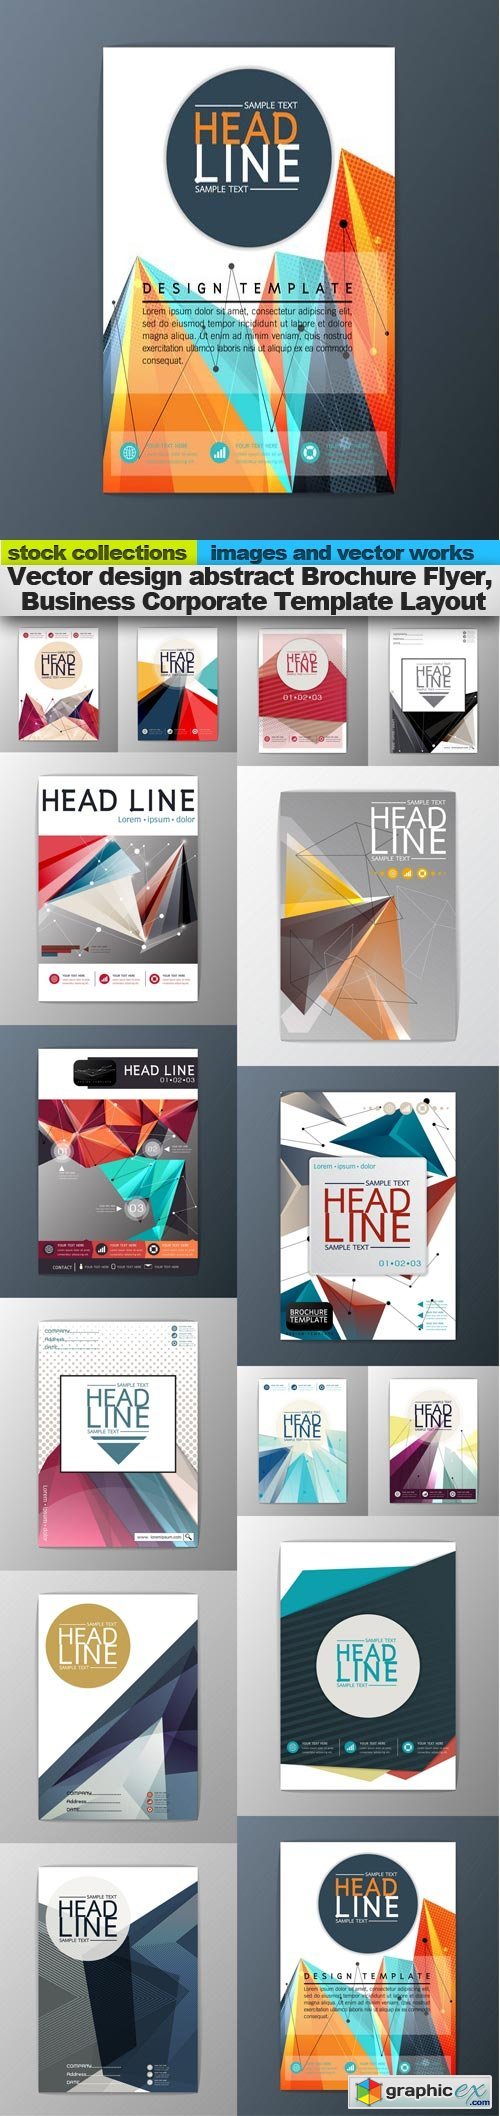 Design abstract Brochure Flyer, Business Corporate Template Layout, 15 x EPS